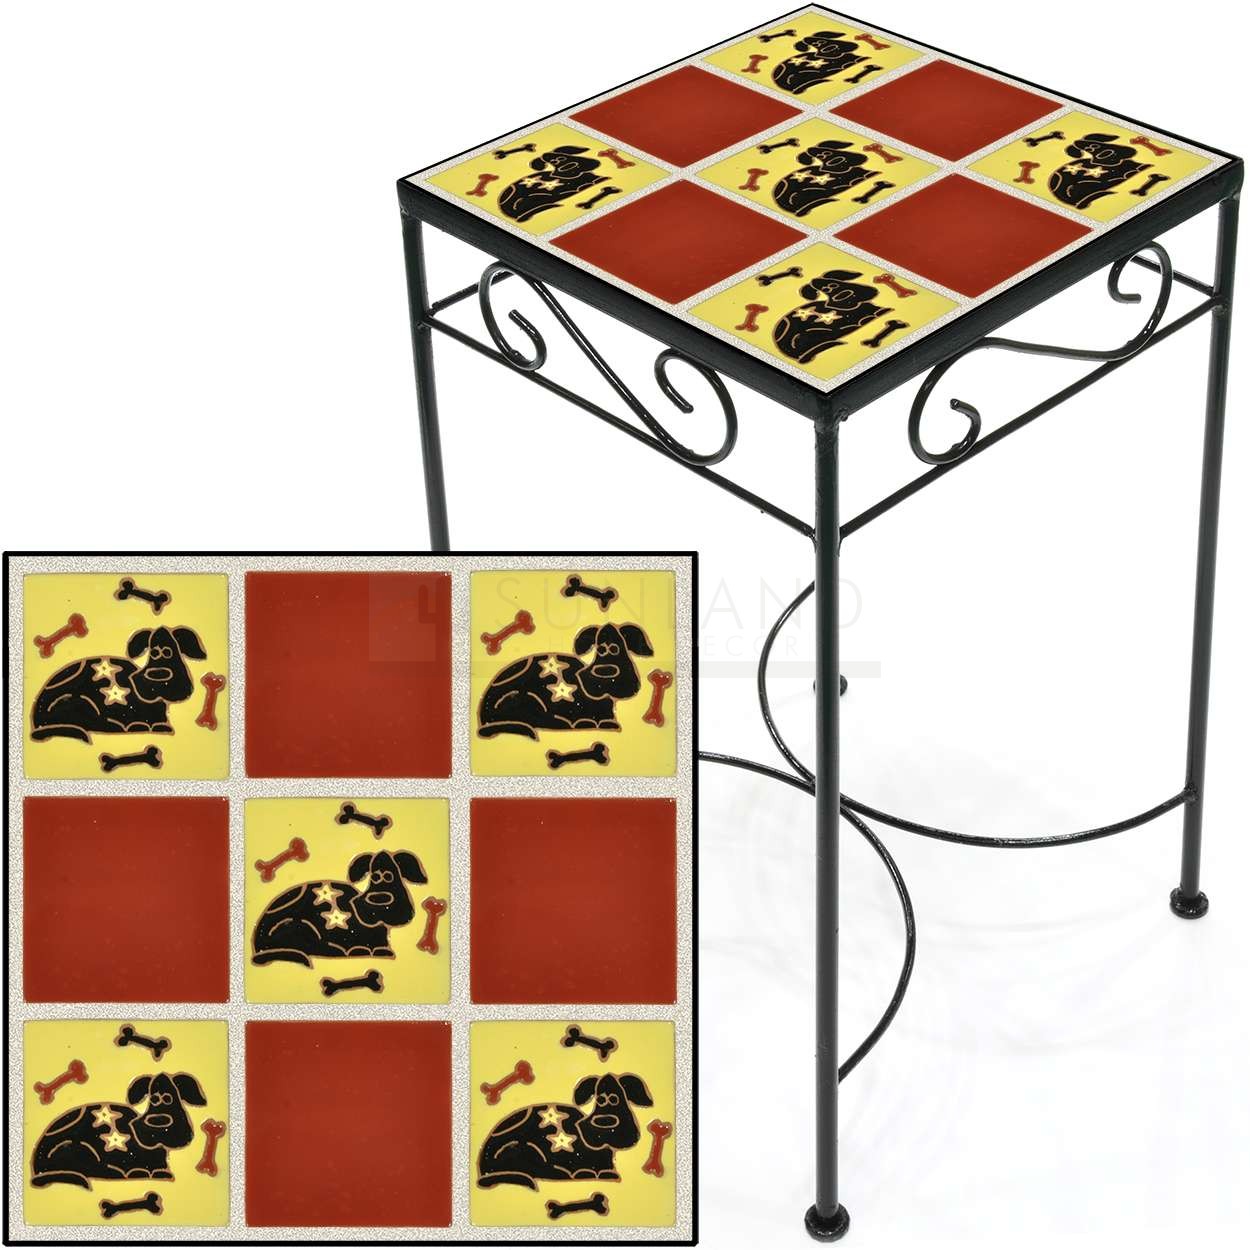 tile accent table dog and bones red metal save square tall mid century dining set side cupboards for living room white sofa with storage cherry wood console narrow behind couch